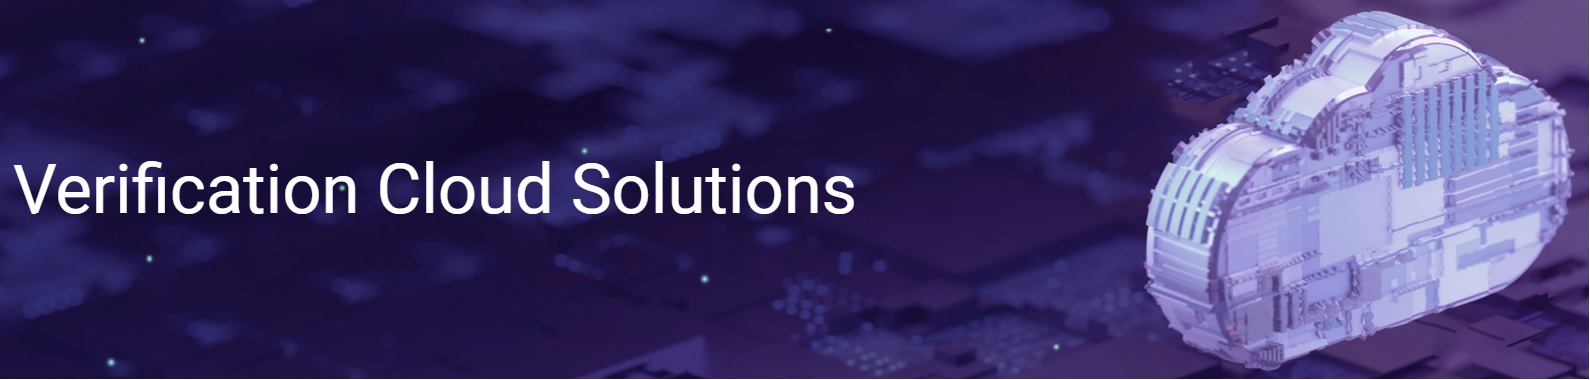 Synopsys Verification Cloud Solutions